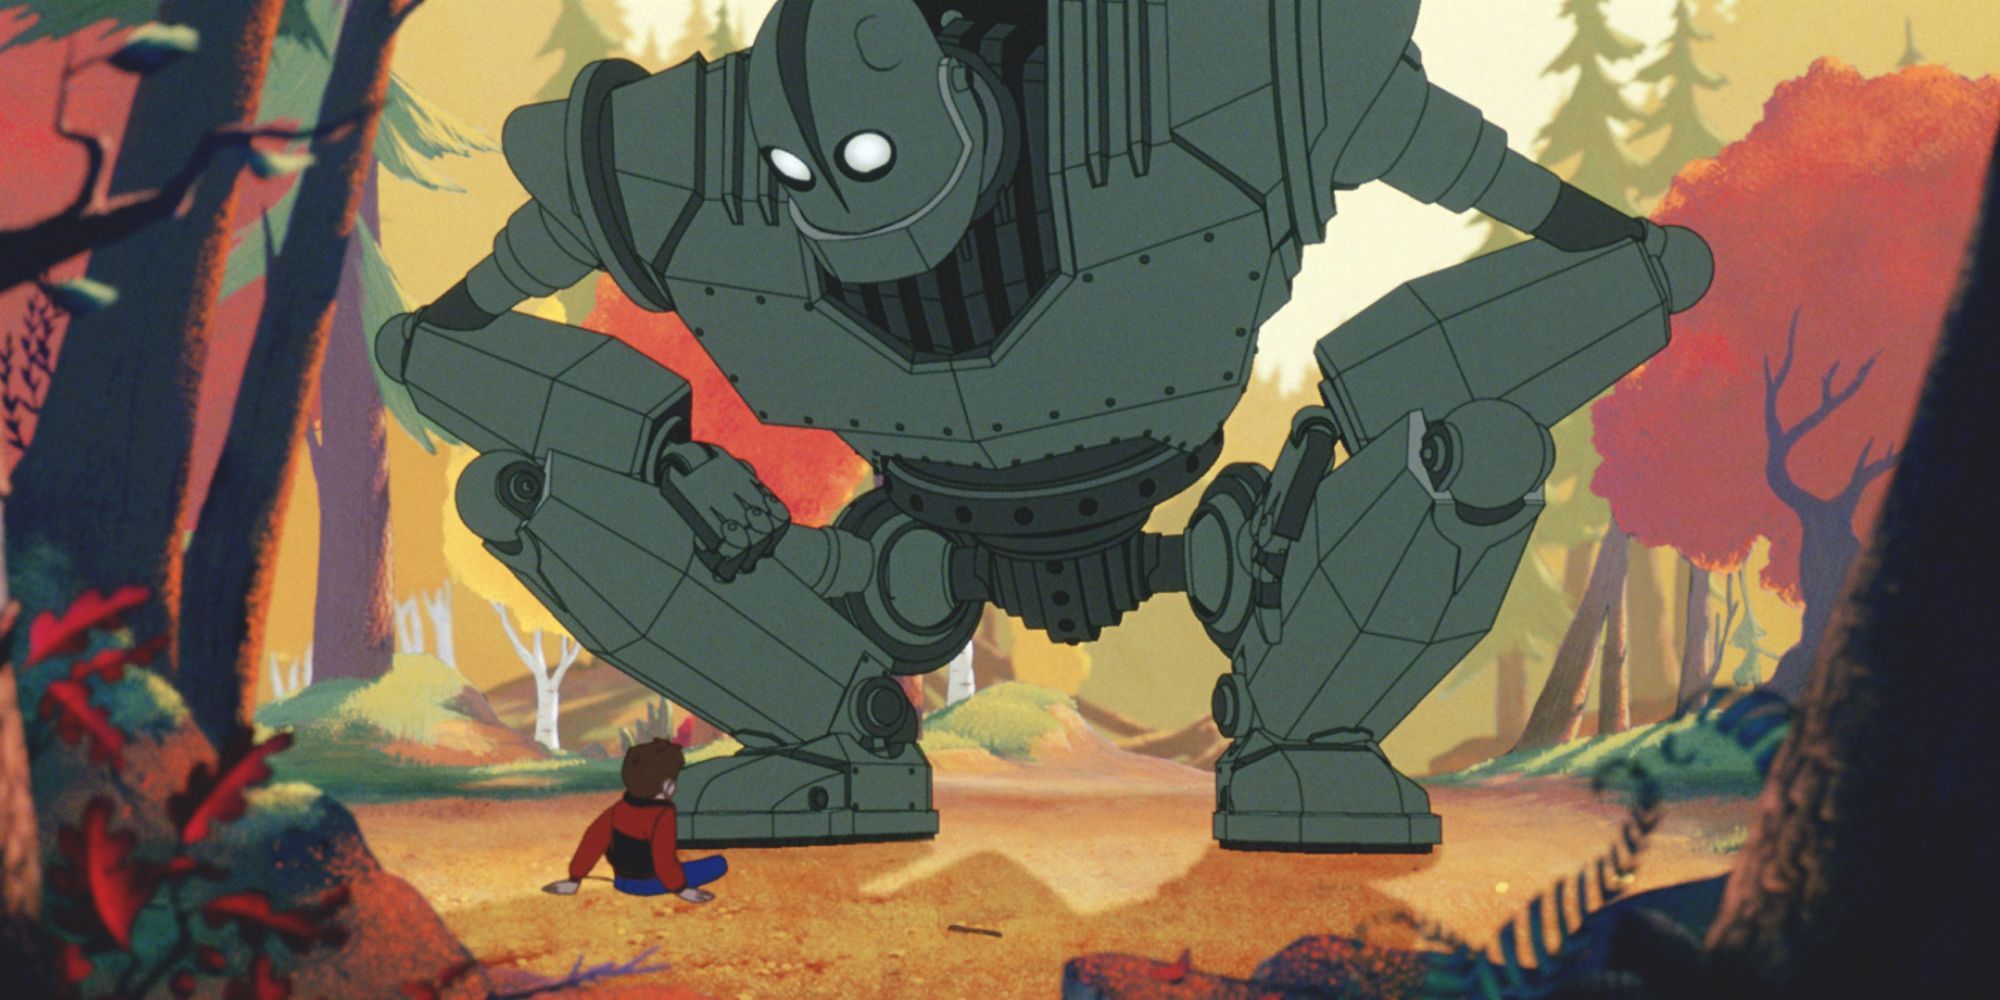 a giant robot looks down at a young boy